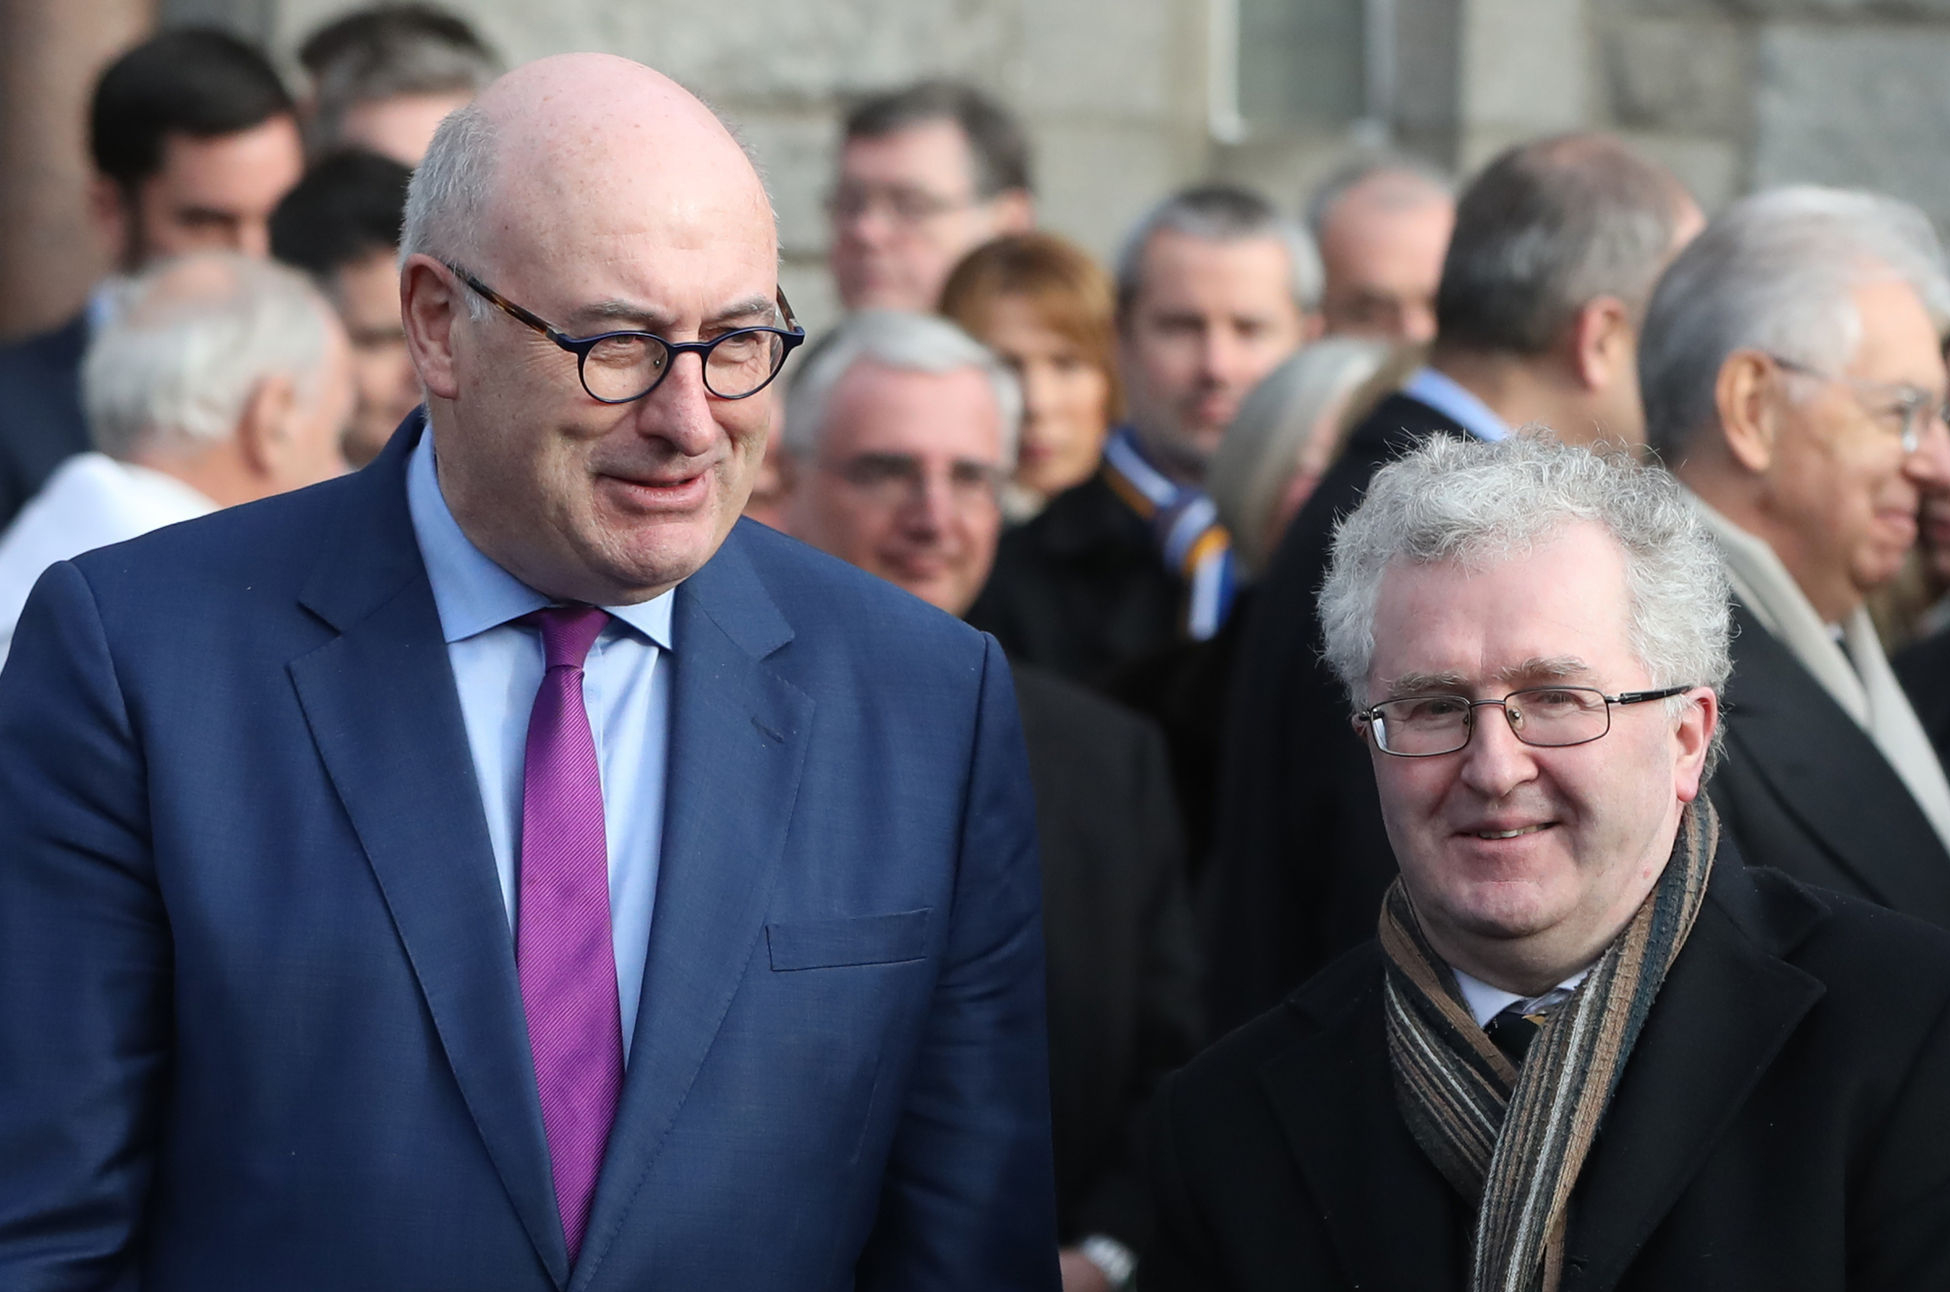 Phil Hogan (left) and Seamus Woulfe attend the funeral of Peter Sutherland at the Church of the Sacred Heart, Donnybrook Golfgate